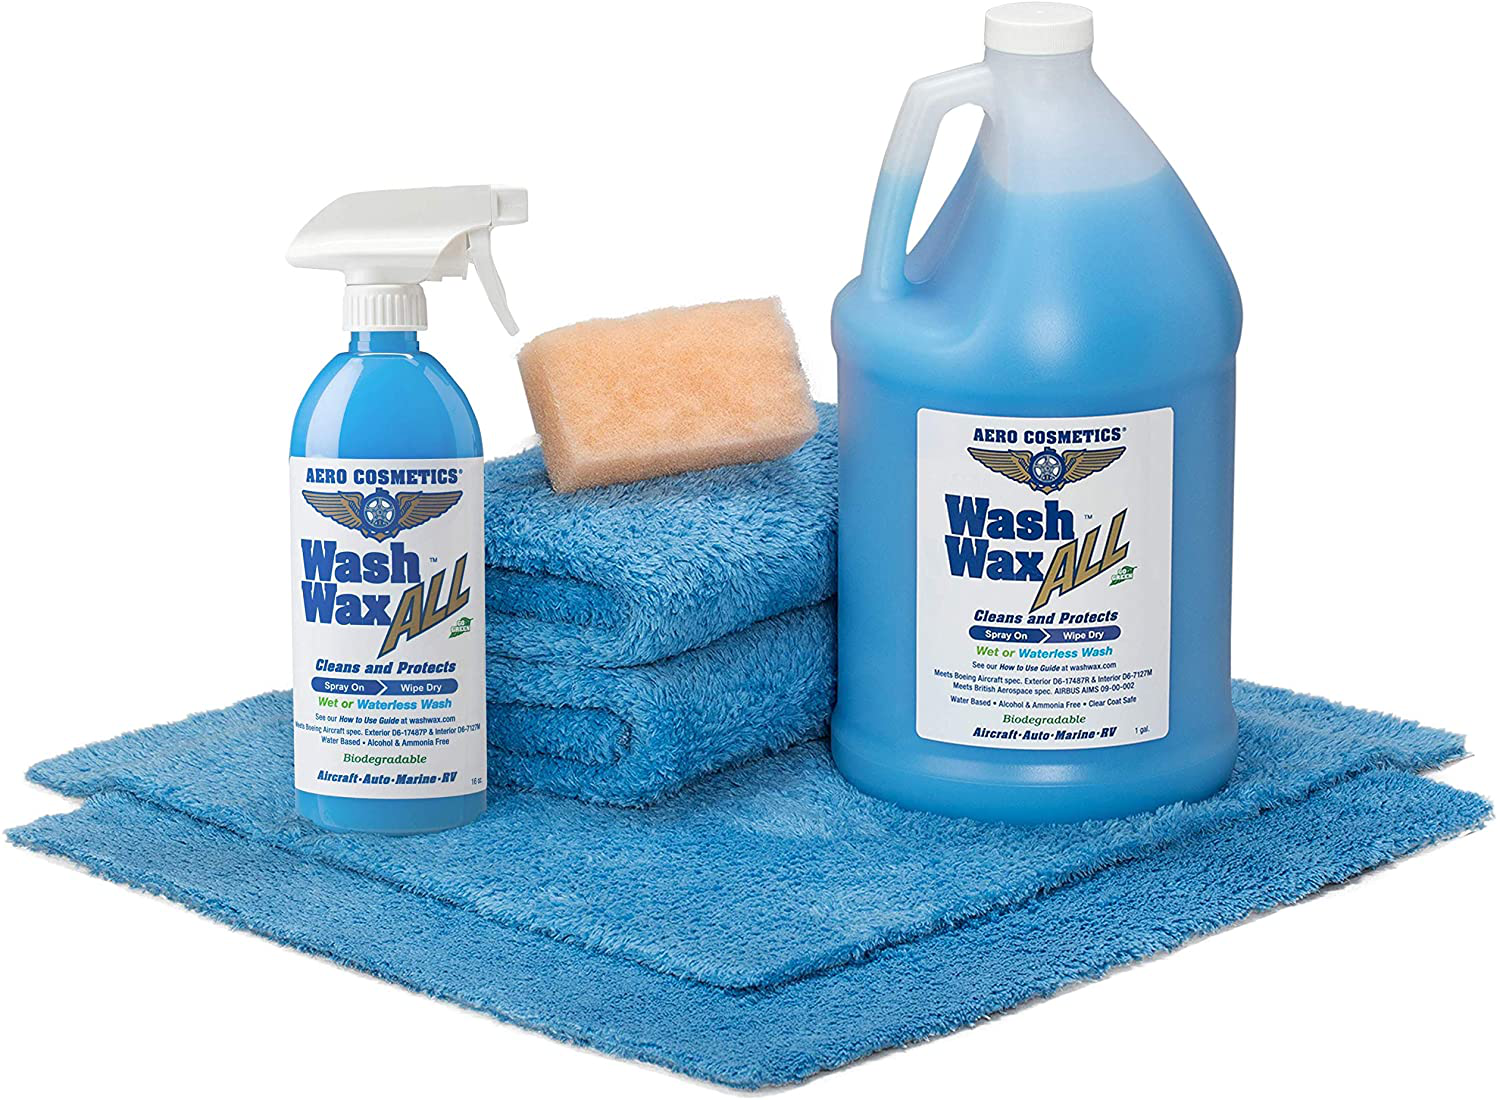 Wet or Waterless Car Wash Wax Kit 144 oz. Aircraft Quality for your Car, RV, Boat, Motorcycle. Guaranteed the Best Wash Wax. Anywhere, Anytime, Home, Office, School, Garage, Parking Lots.